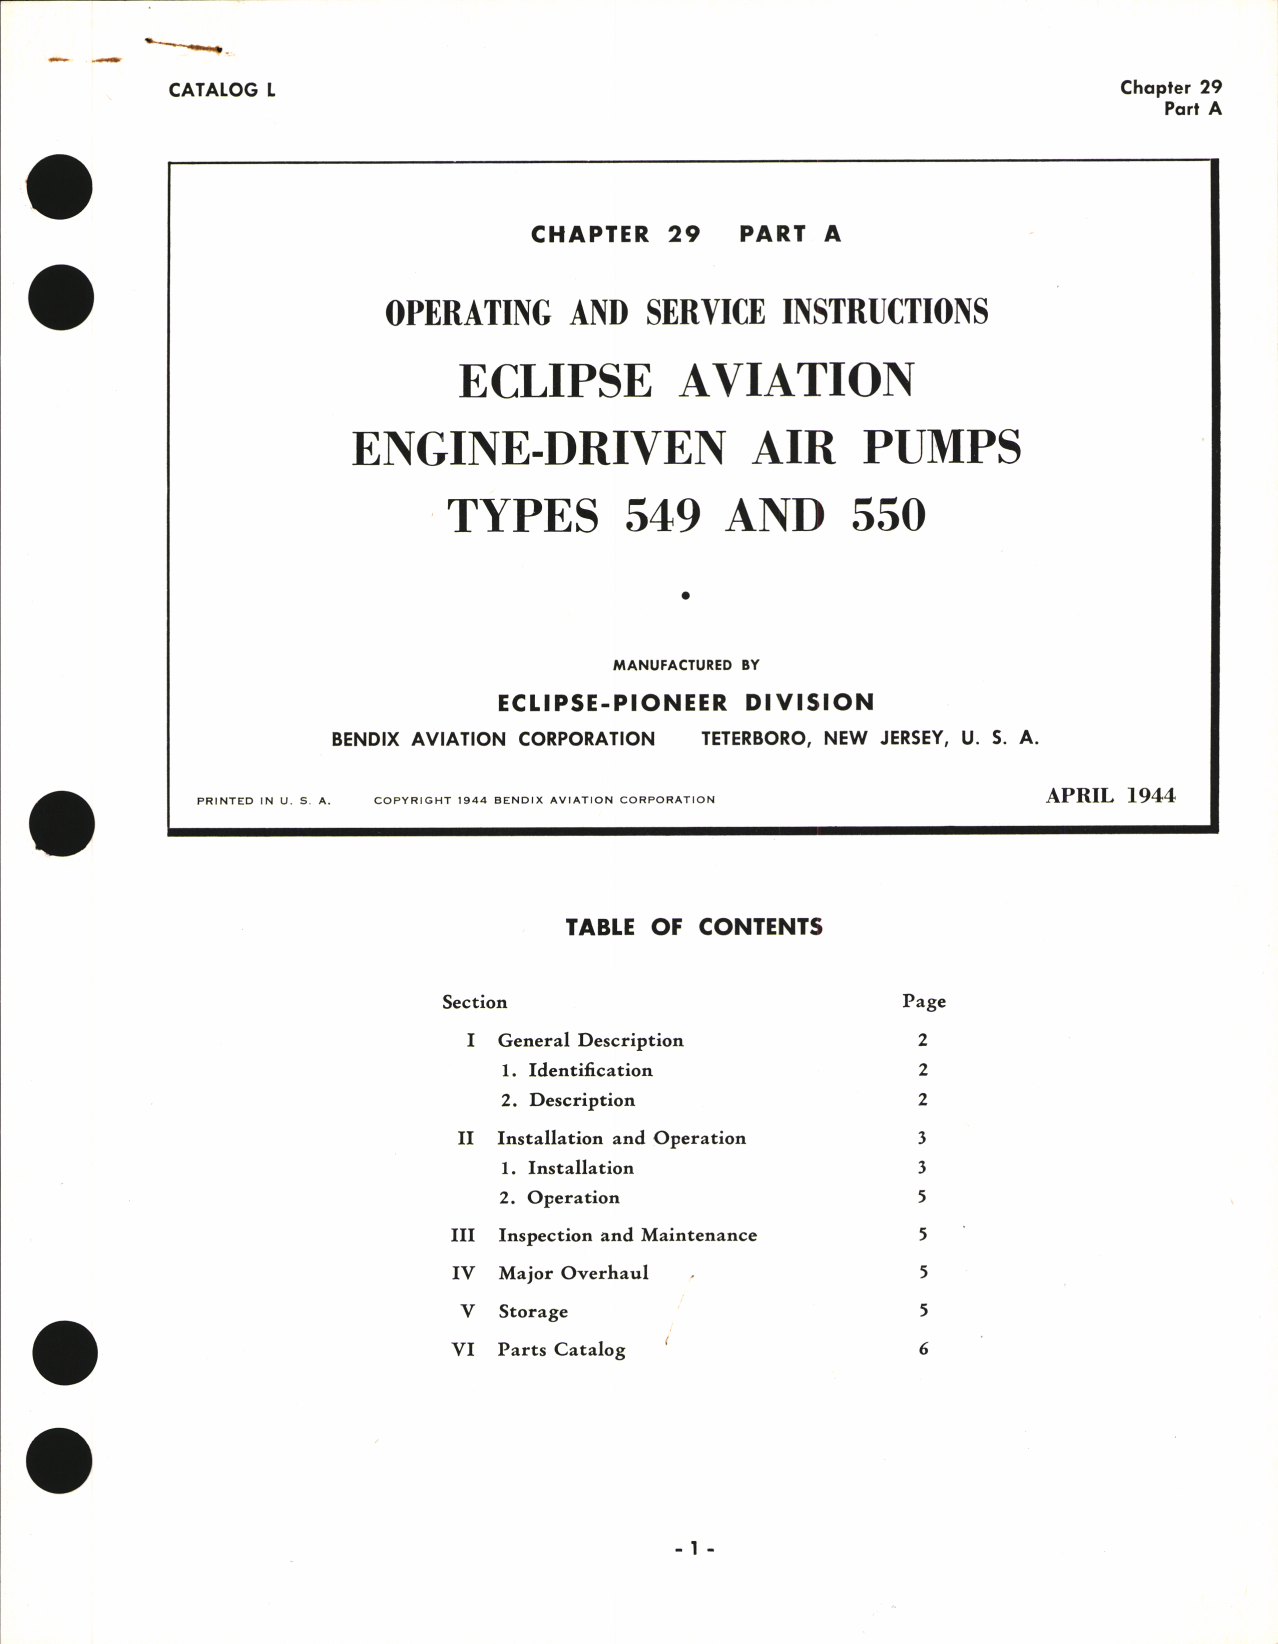 Sample page 1 from AirCorps Library document: Operating and Service Instructions  Eclipse Aviation Engine-Driven Air Pumps Types 549 and 550